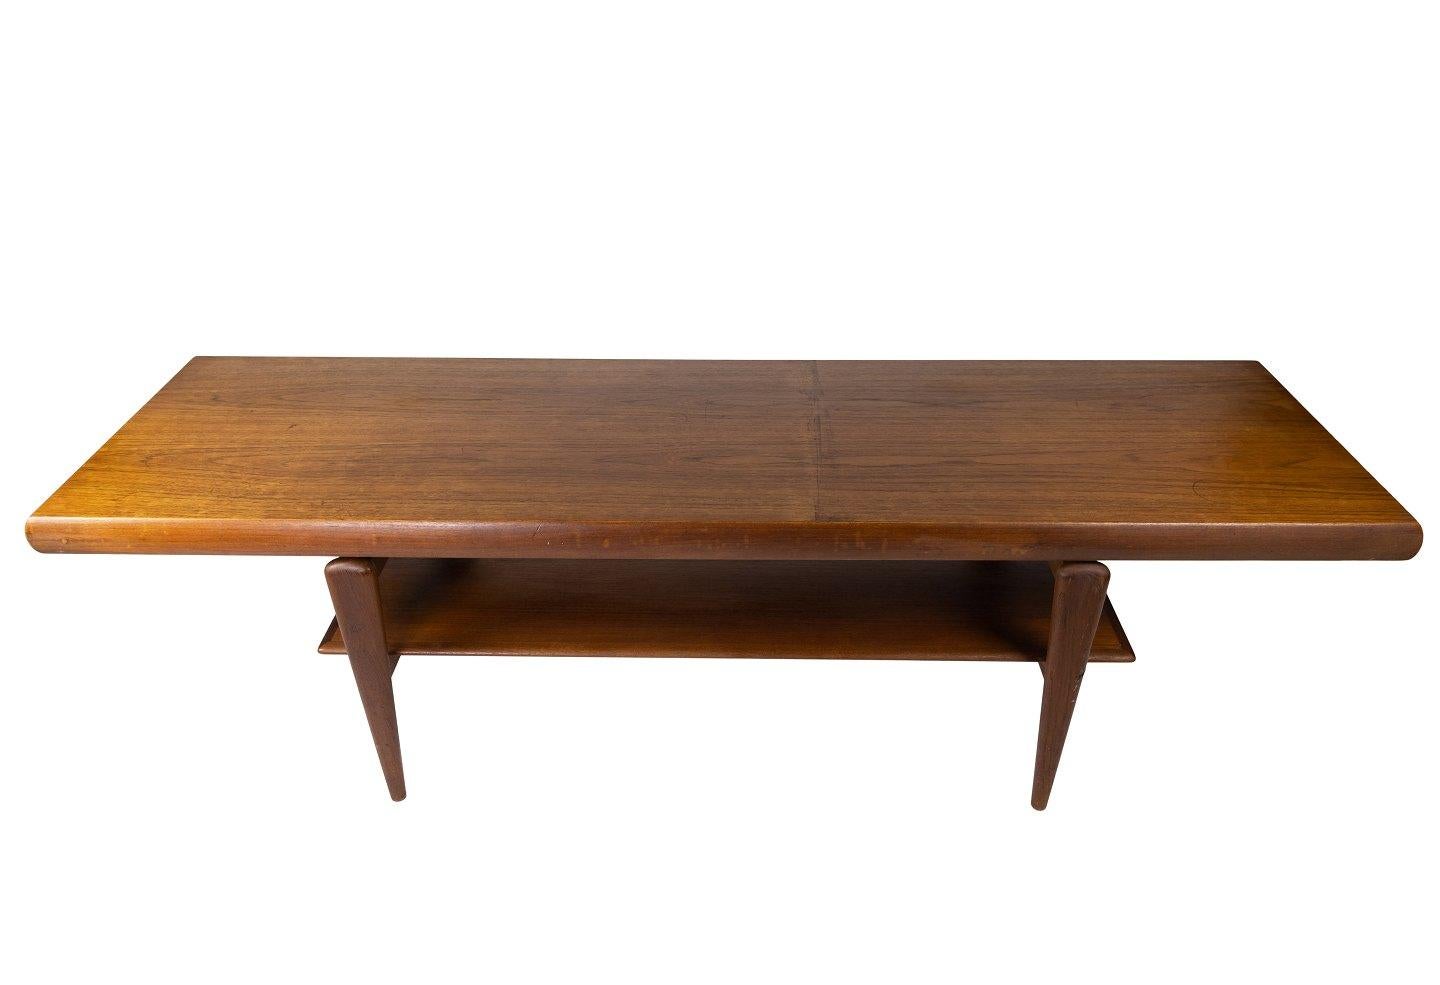 The coffee table, a Danish design from the 1960s, showcases the timeless elegance of teak wood. With its sleek lines and understated sophistication, it epitomizes the mid-century modern aesthetic. This piece seamlessly blends form and function,